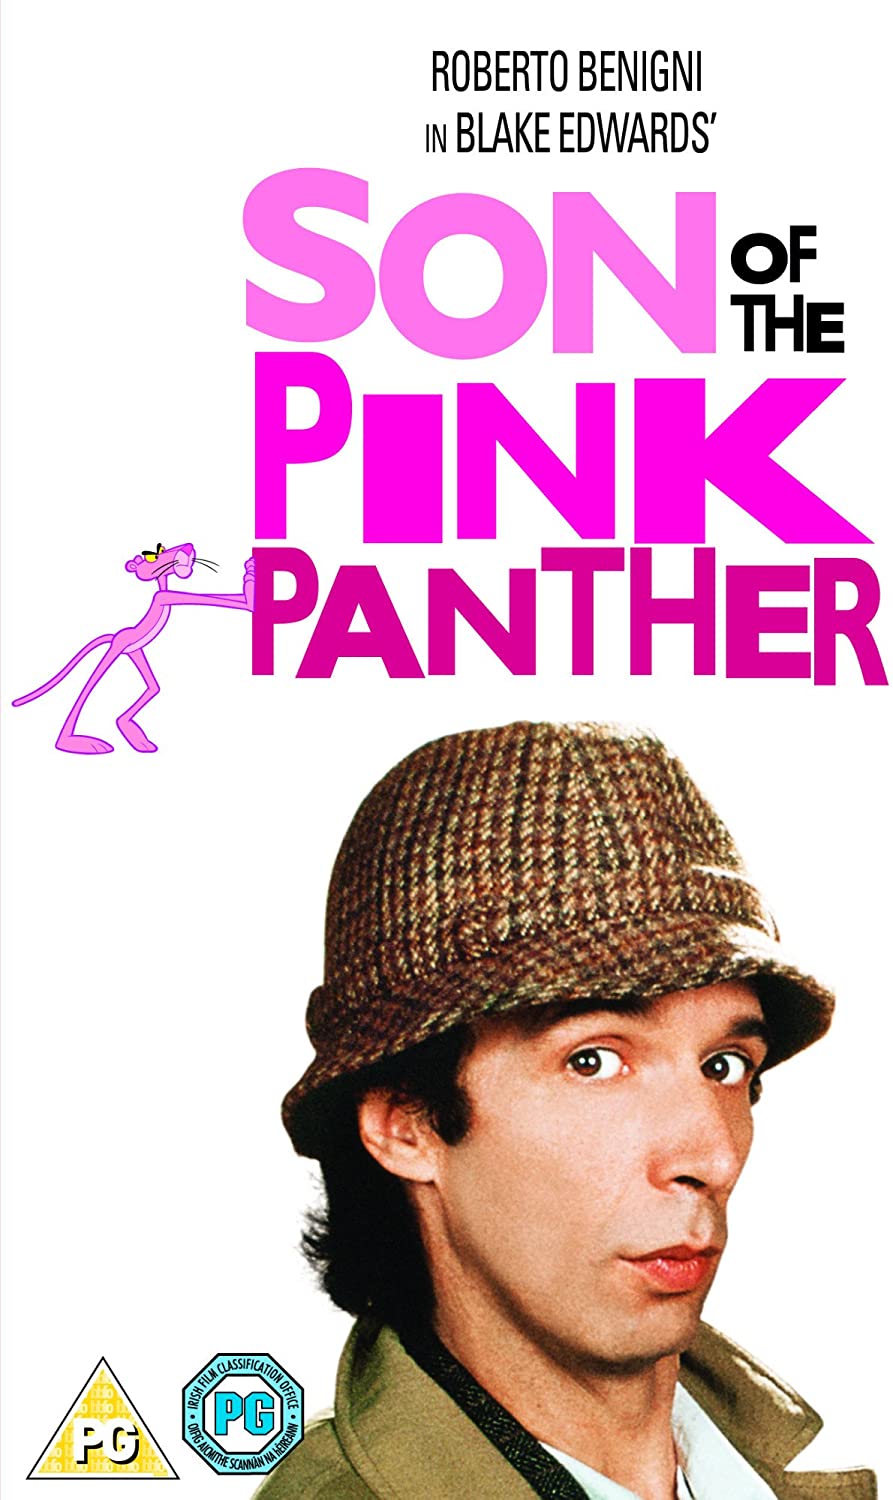 Son Of The Pink Panther [2017] - Comedy/Parody [DVD]